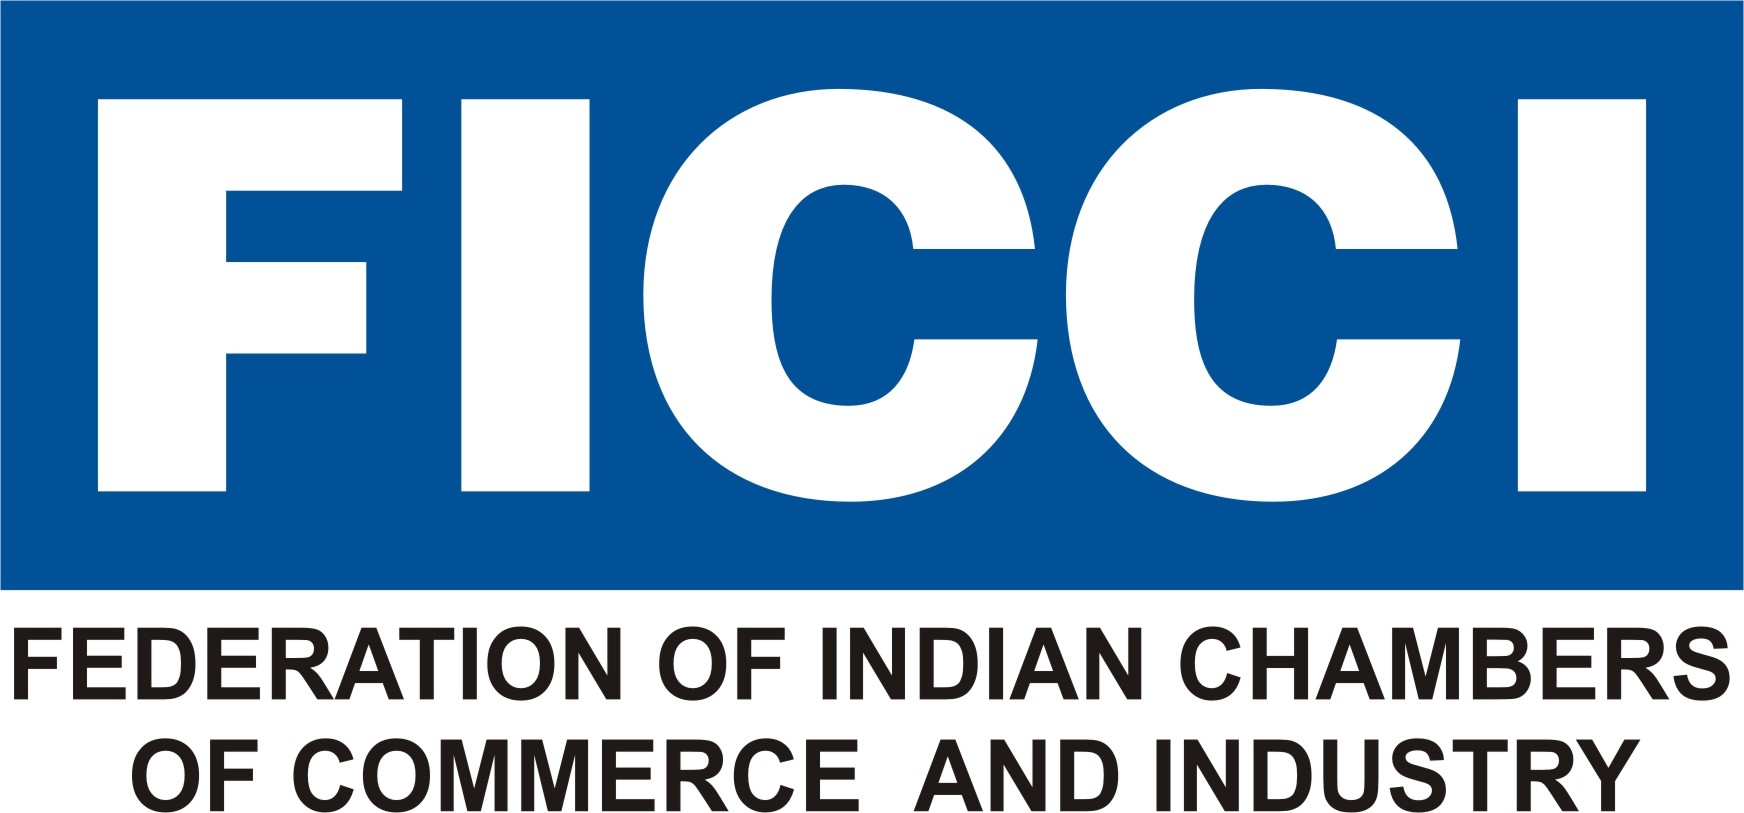 FICCI is a non-government, non-benefit association that works closely with the government